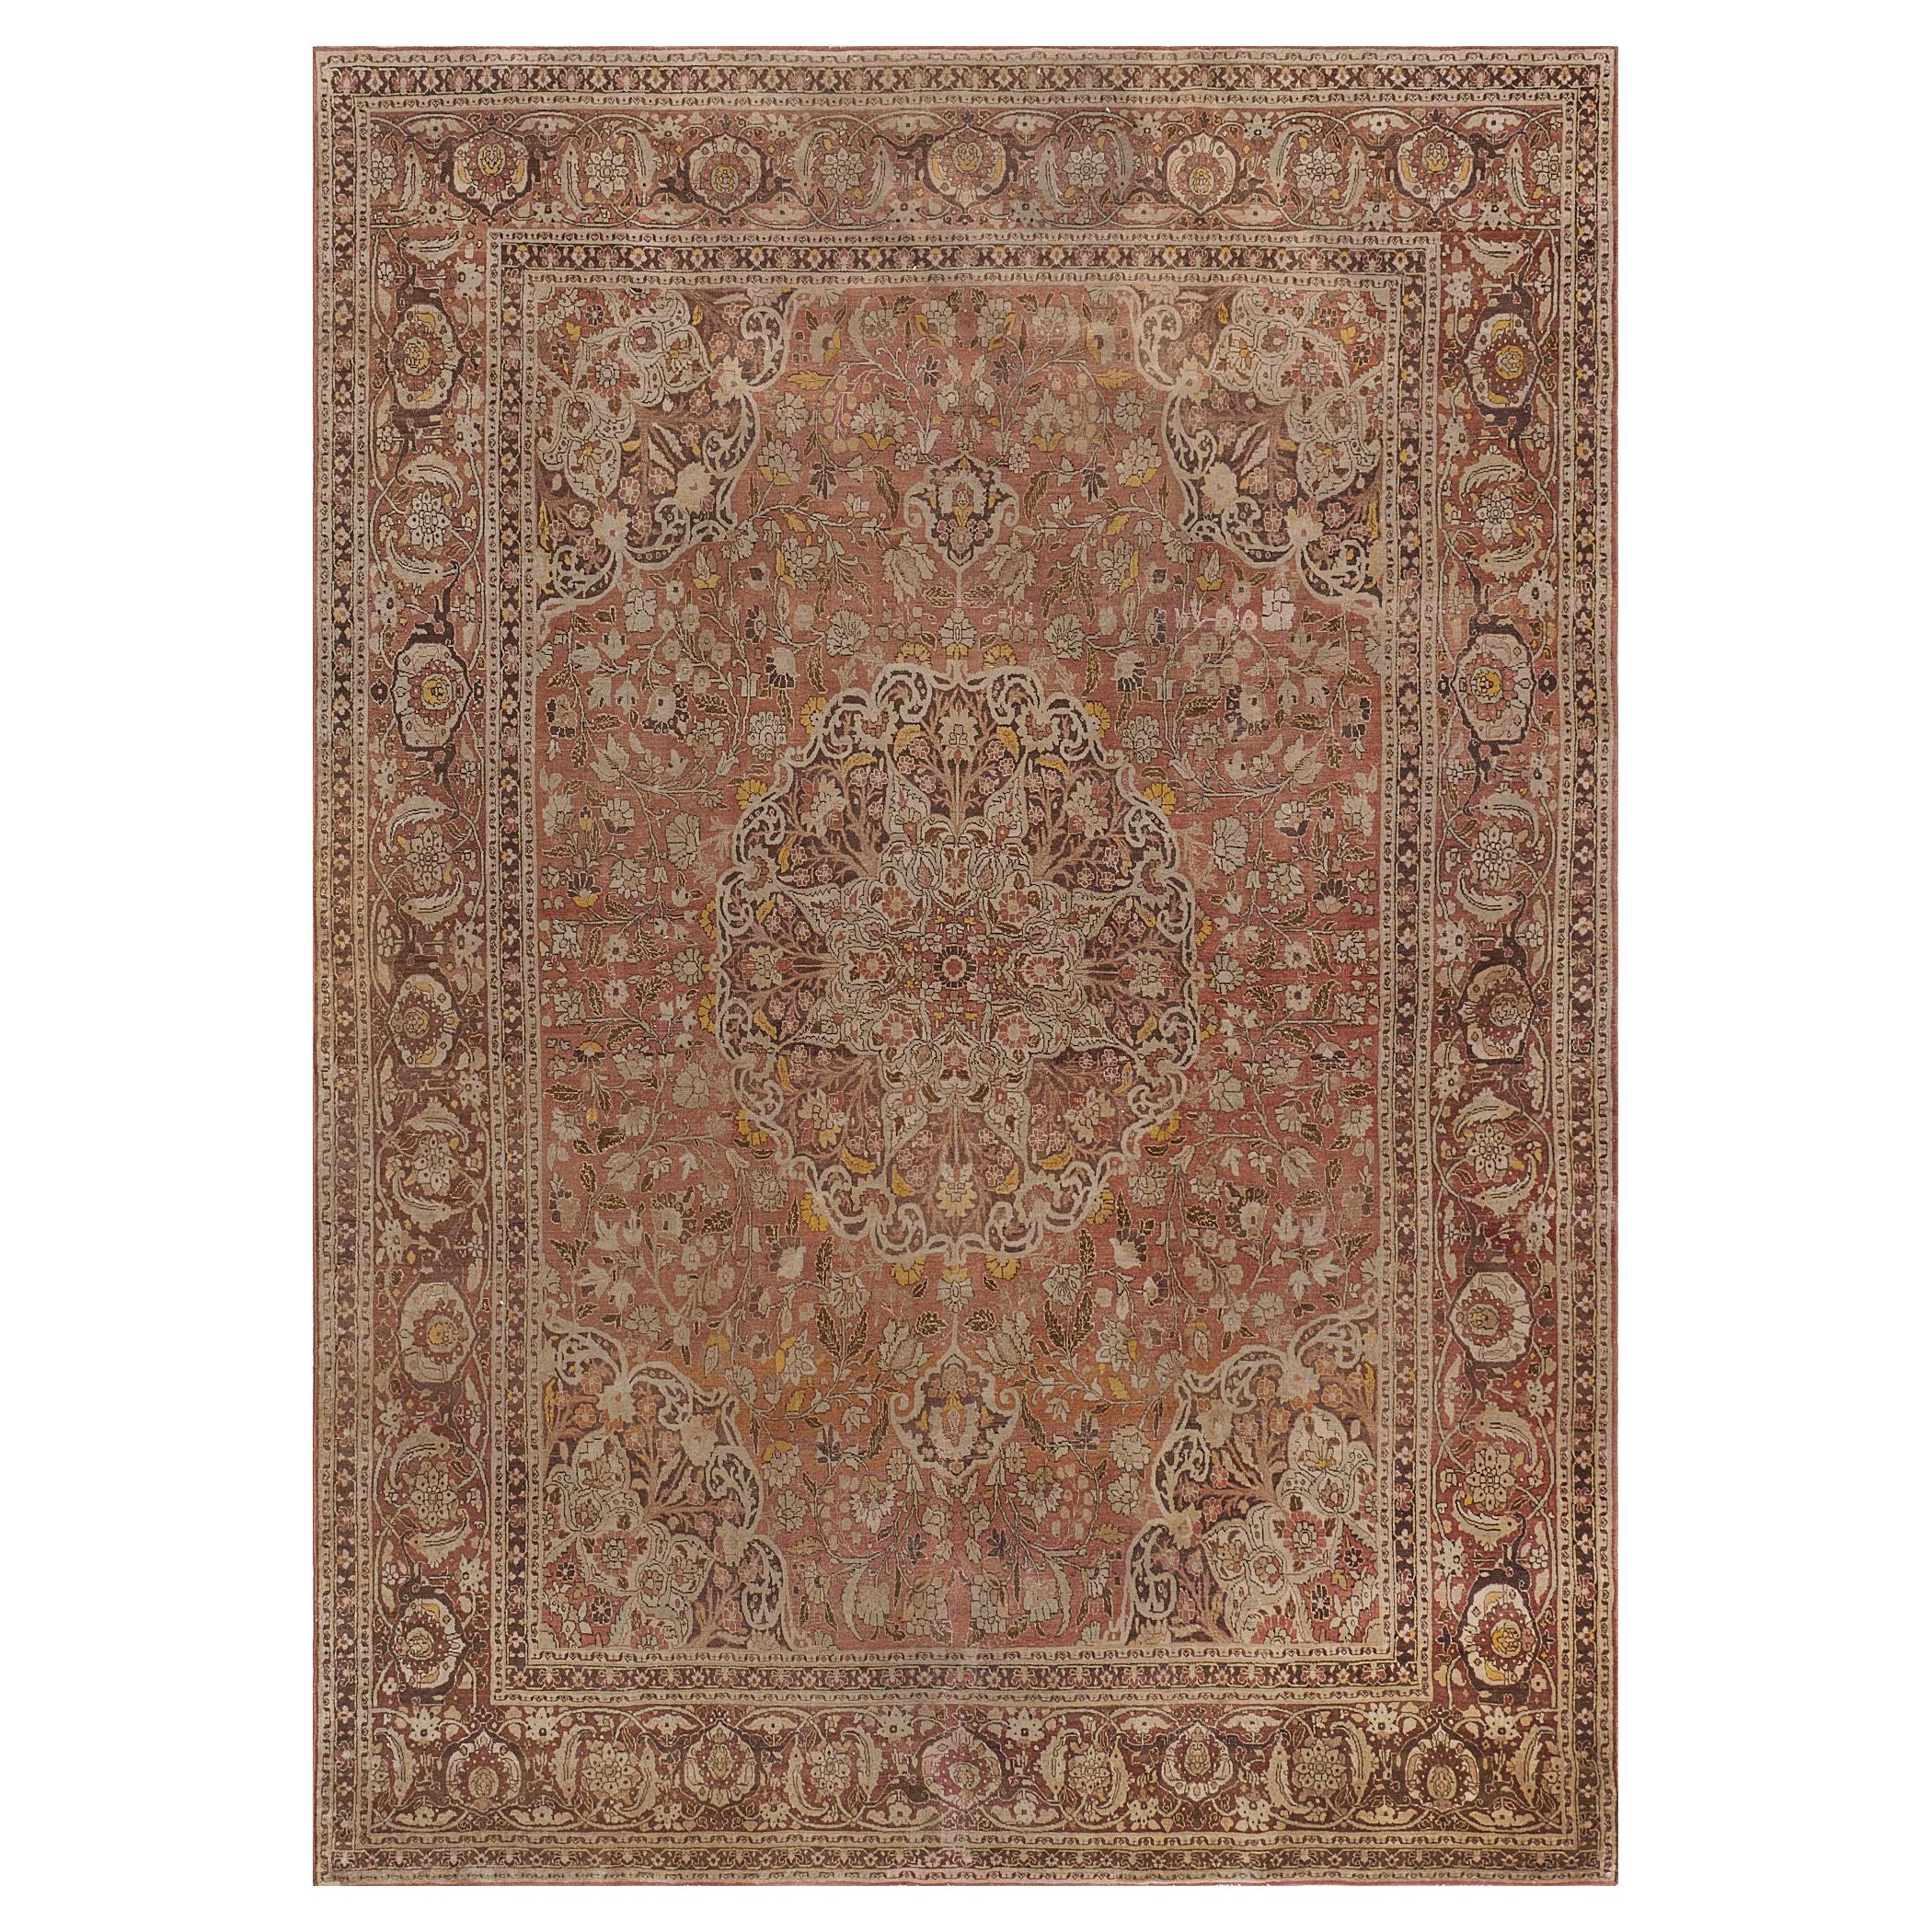 Antique Late 19th Century Handwoven Wool Tabriz Rug For Sale